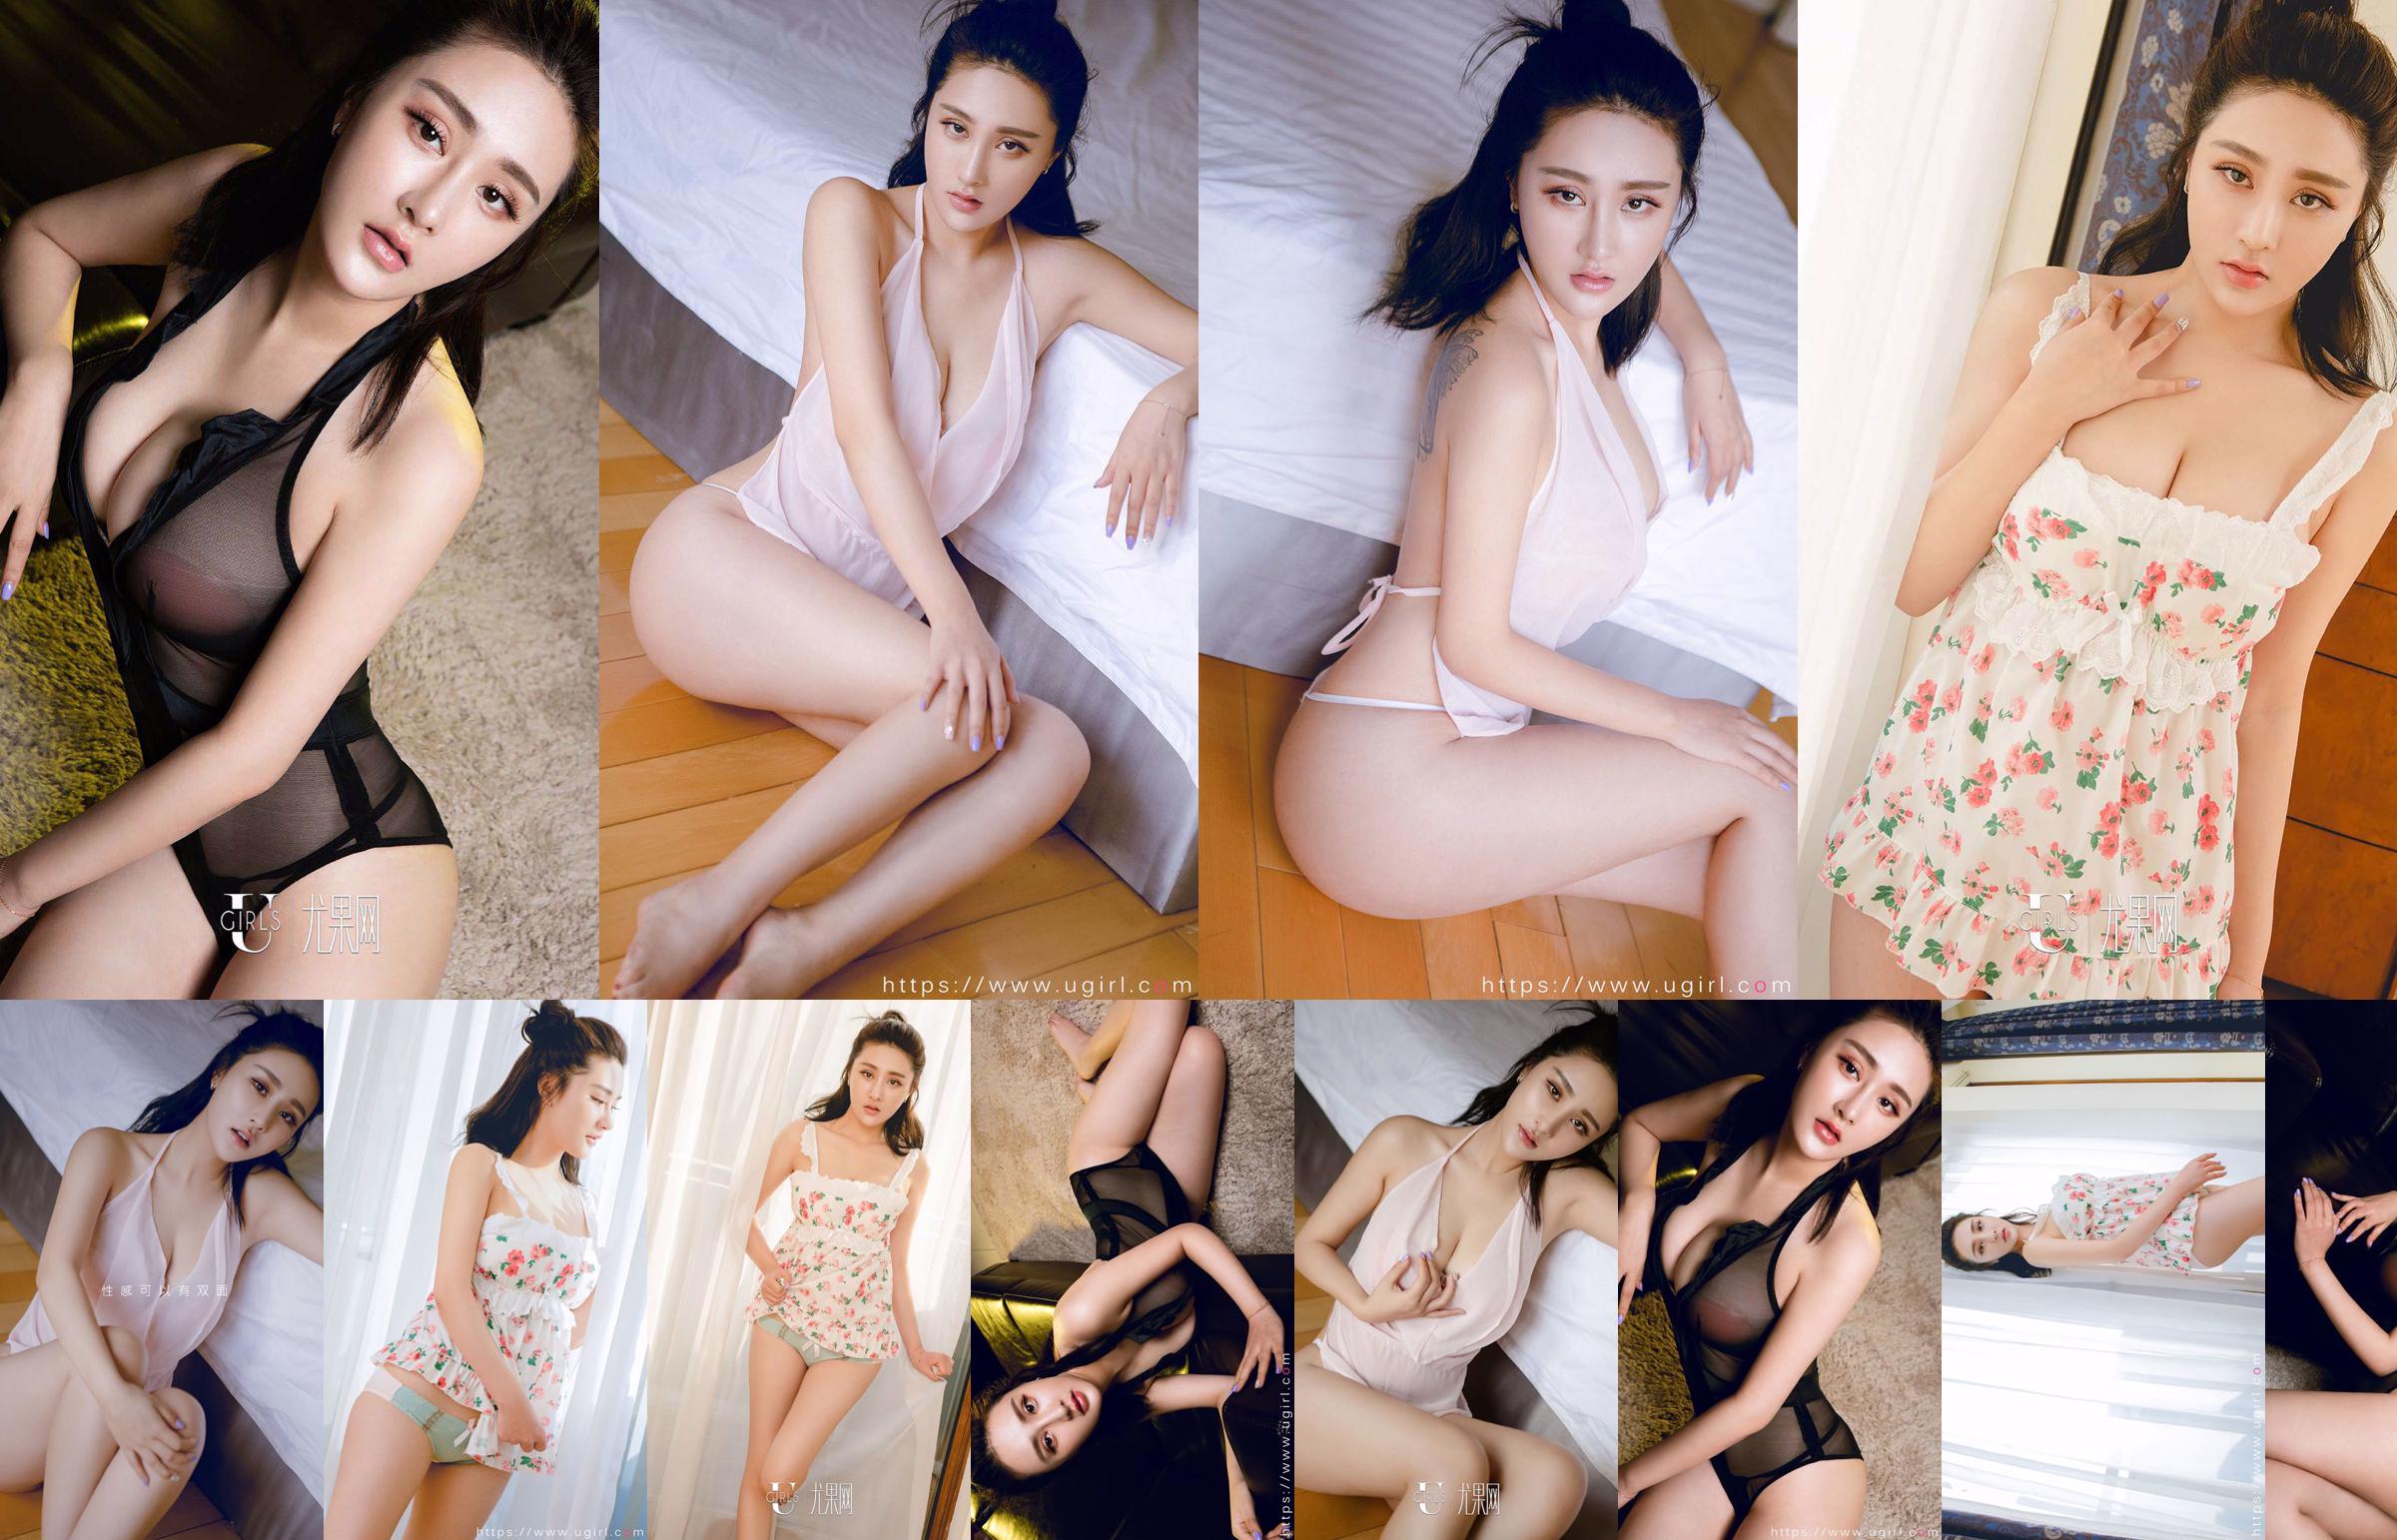 Zhang Xinmiao "It's All Angels' Trouble" [Love Youwu Ugirls] No.534 No.562466 Page 1